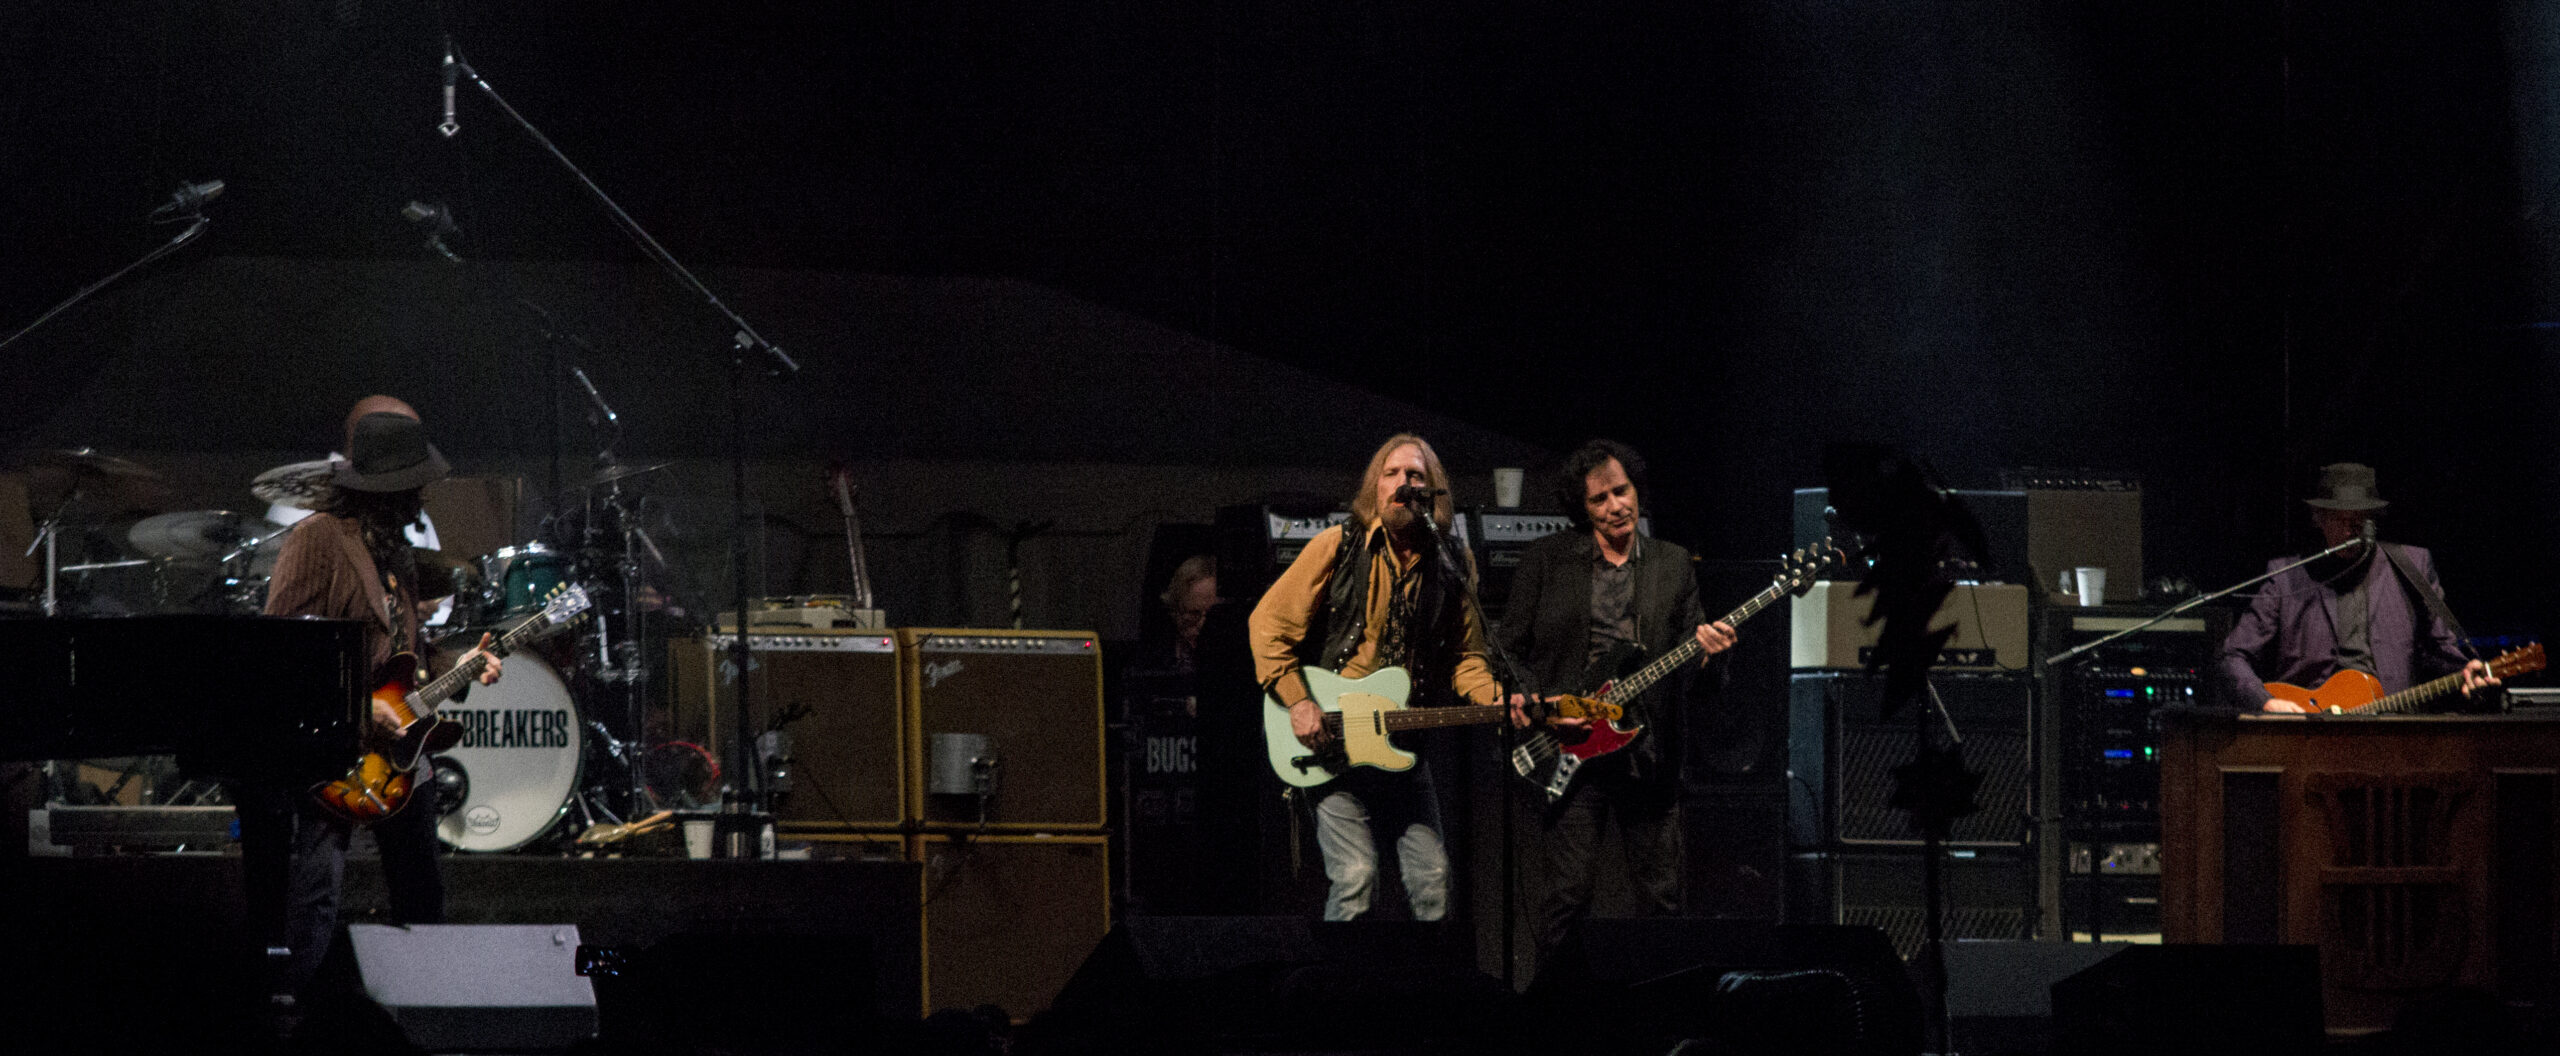 Tom Petty and the Heartbreakers performing at Lockn 2014. Photo by: Matthew McGuire